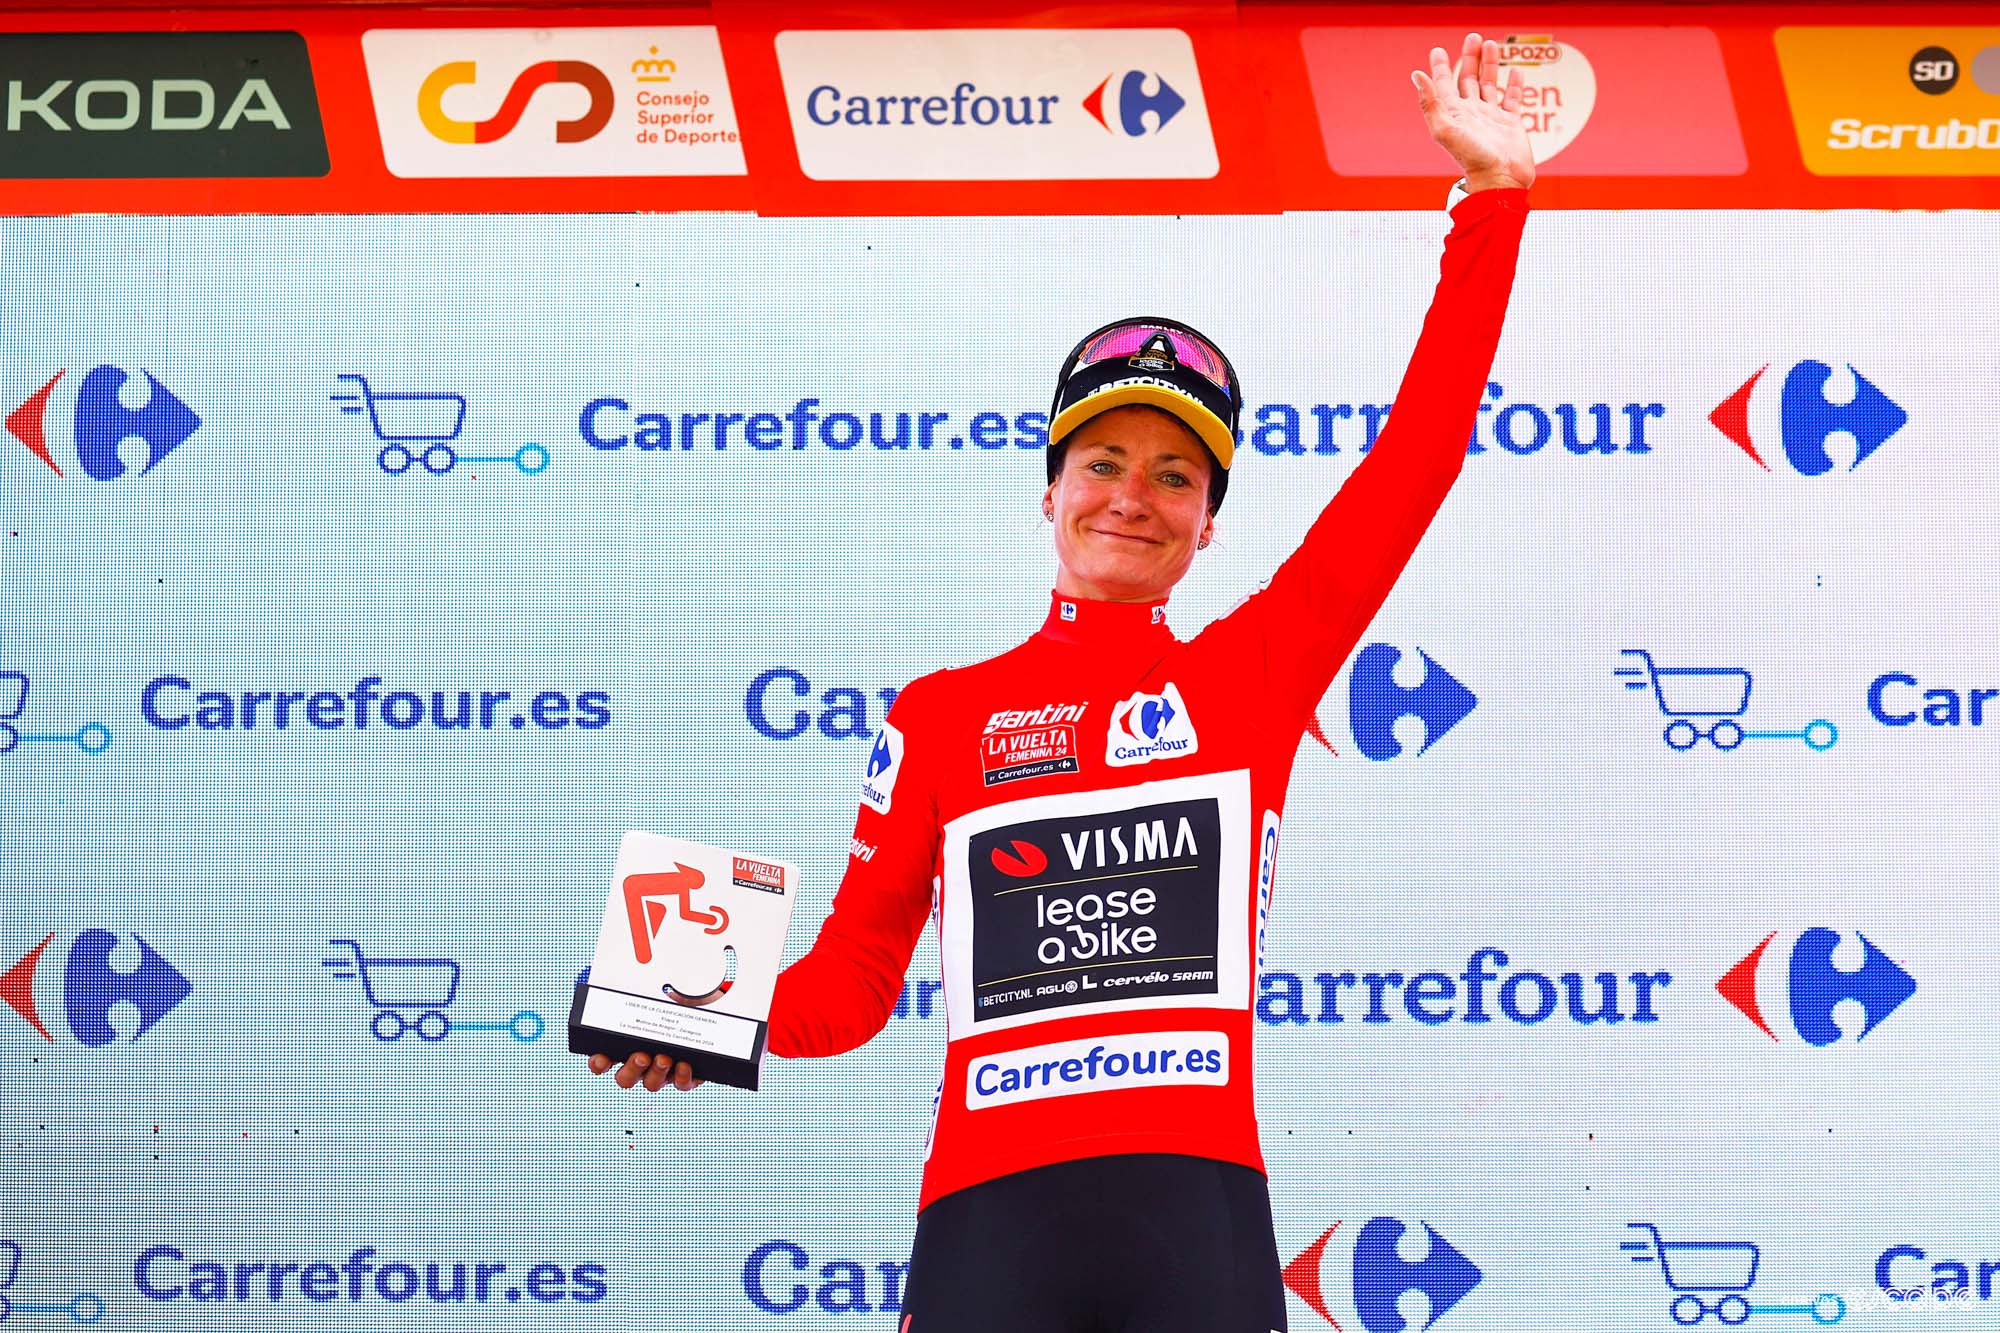 Marianne Vos raises her arm on the podium as she collects the red jersey for current race leader.